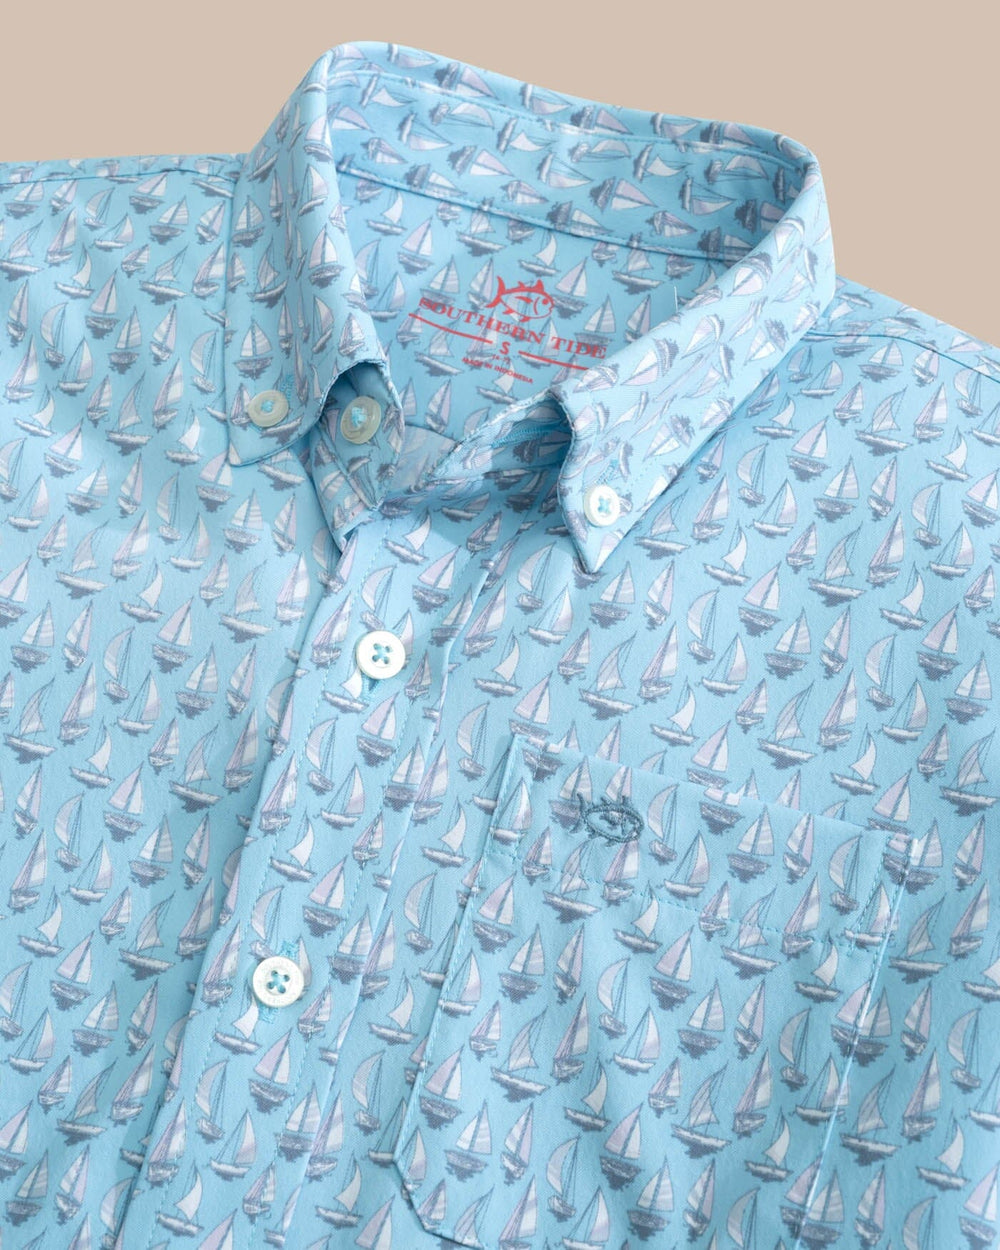 The detail view of the Southern Tide Youth Intercoastal Forget A-Boat It Short Sleeve Sport Shirt by Southern Tide - Clearwater Blue